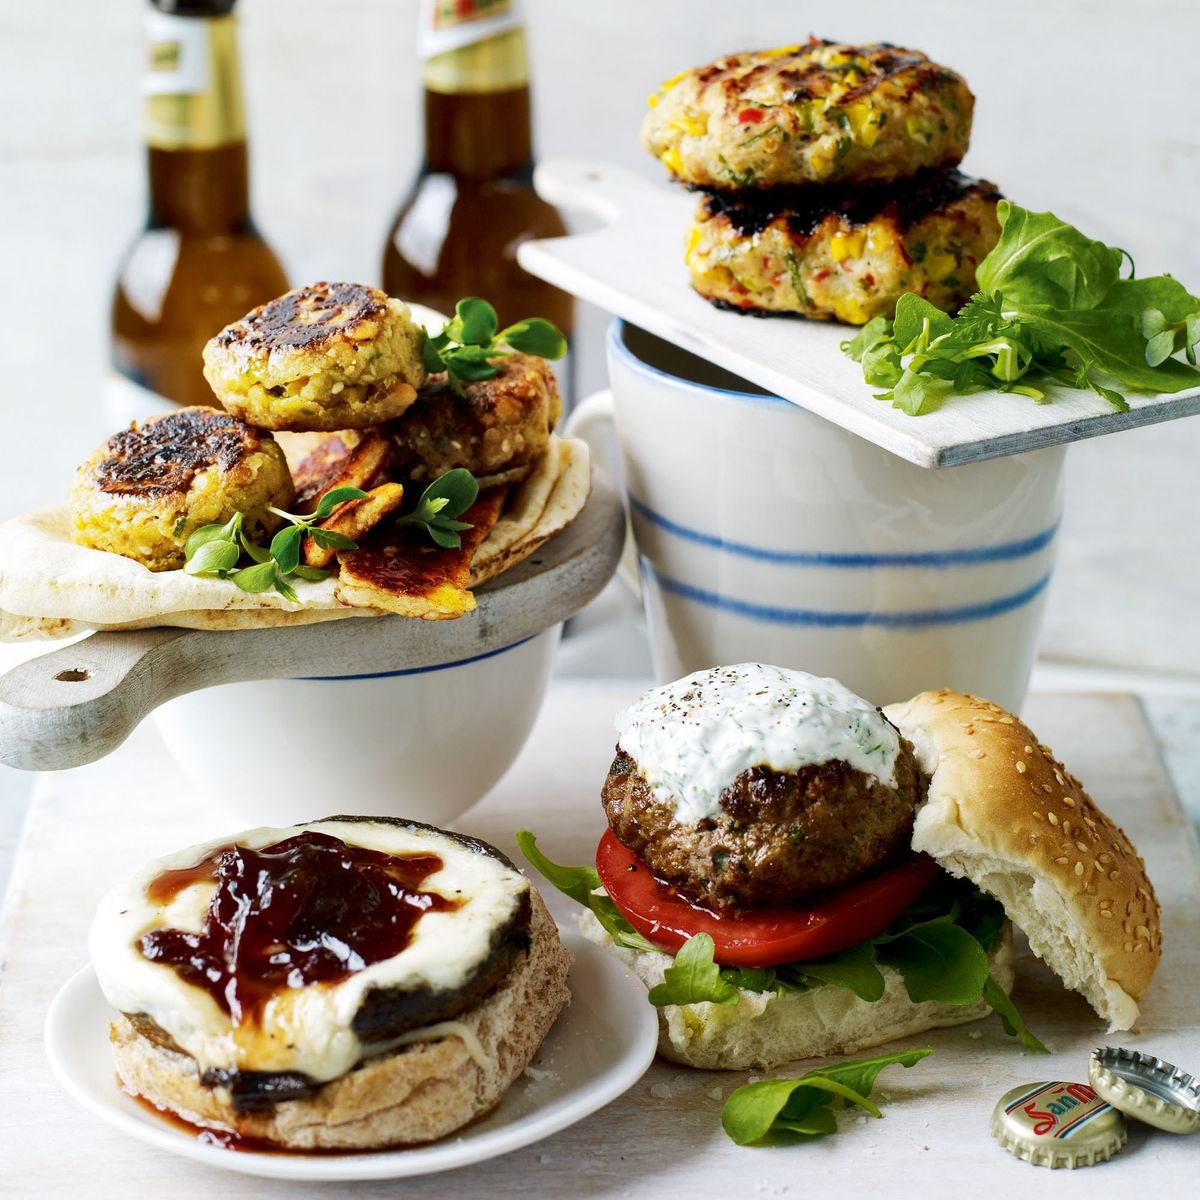 These Middle Eastern lamb burgers are a perfect change to an Easter main course